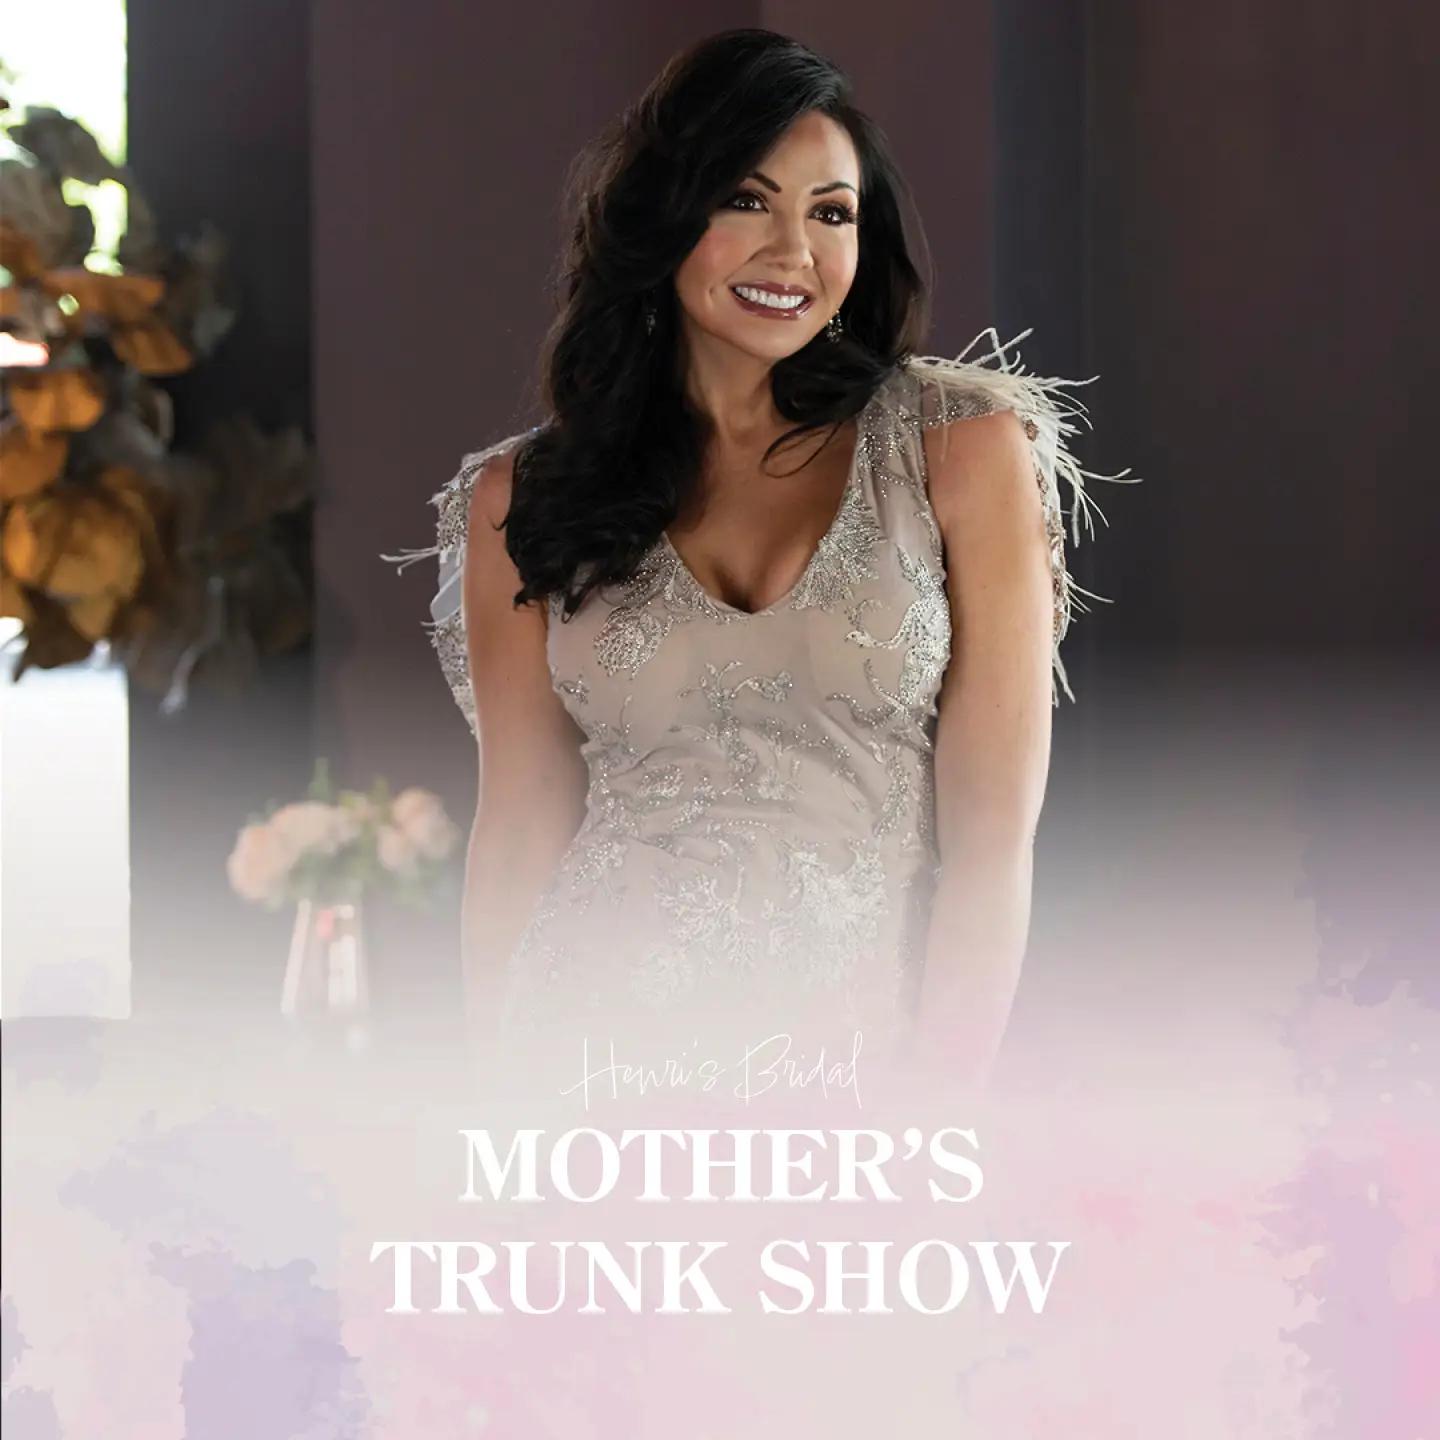 Mothers Trunk Show